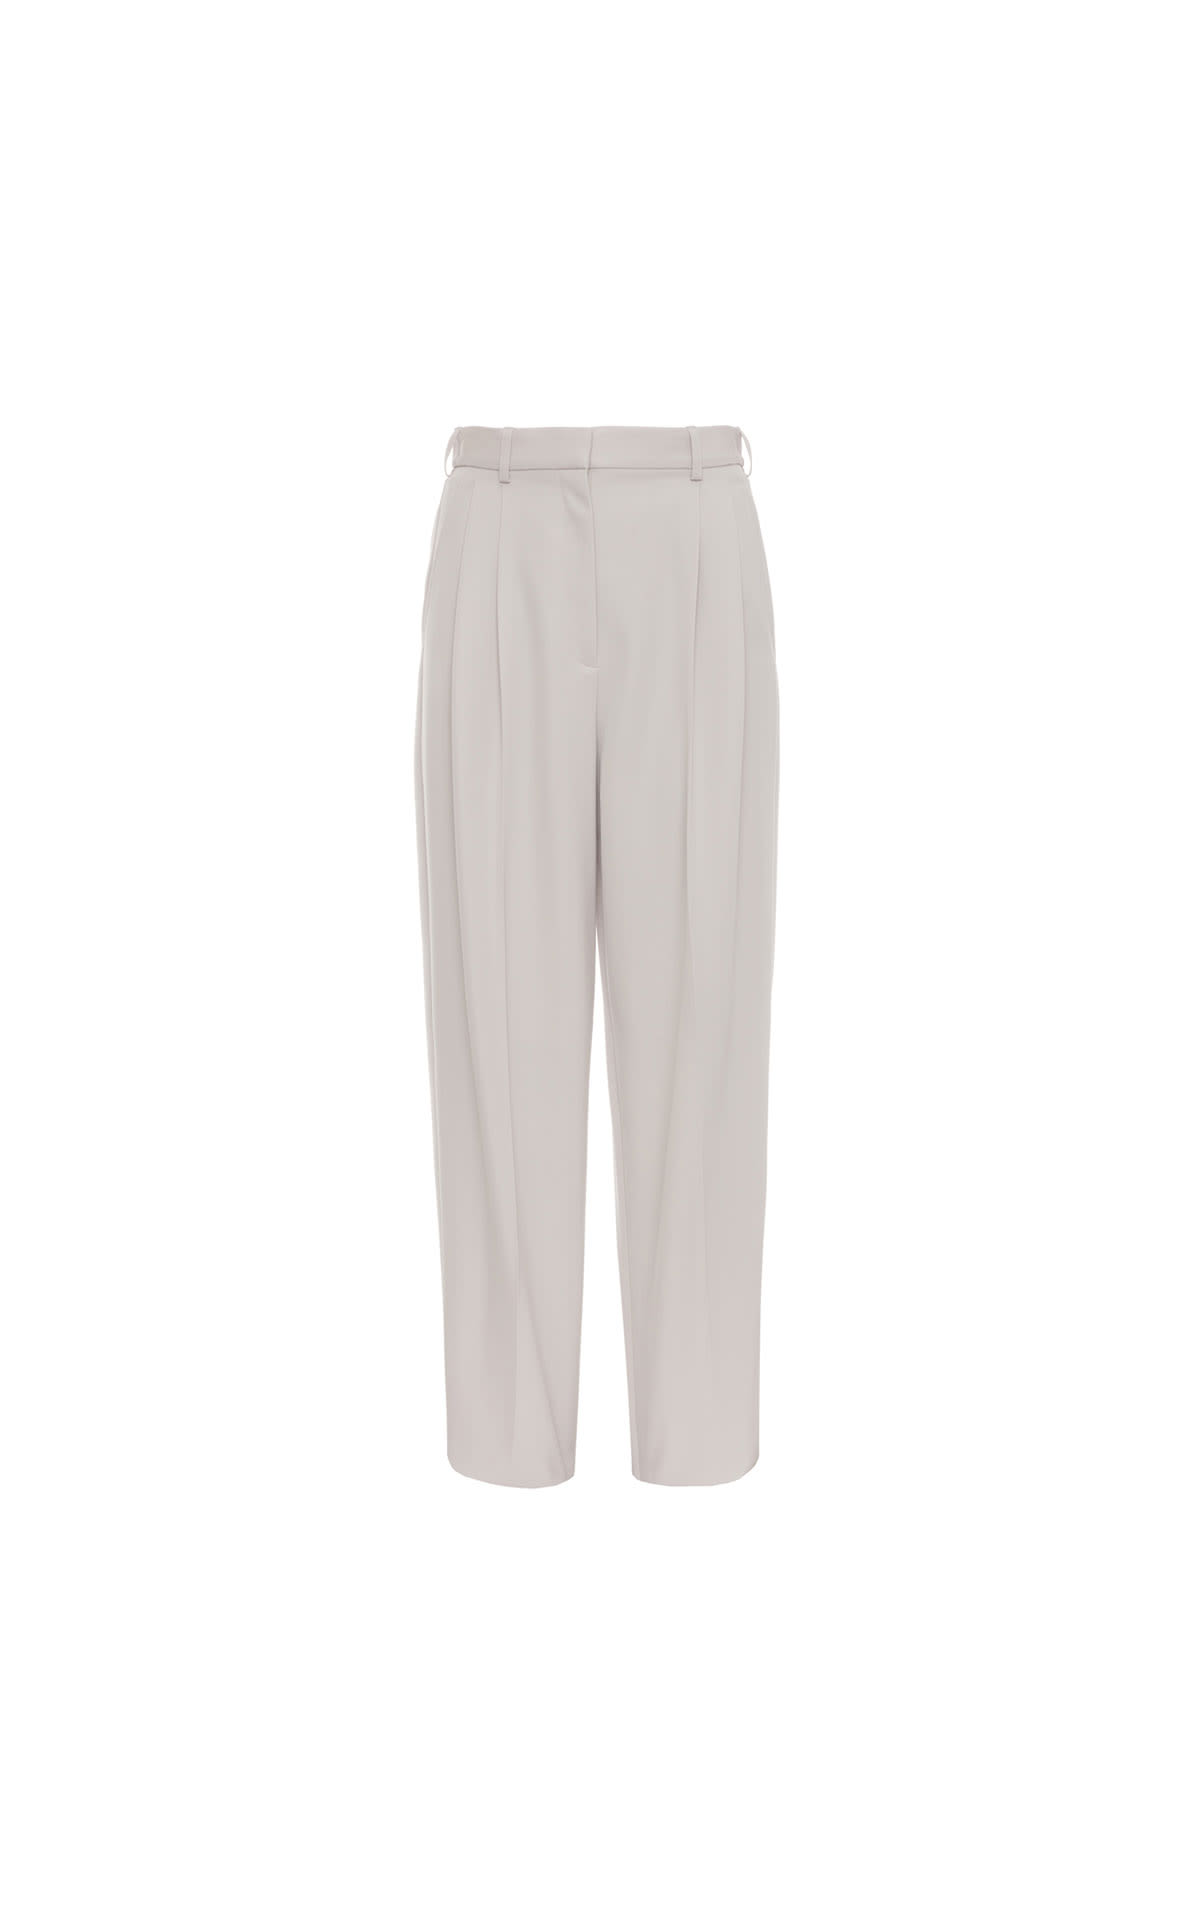 Stella McCartney Louise trouser from Bicester Village